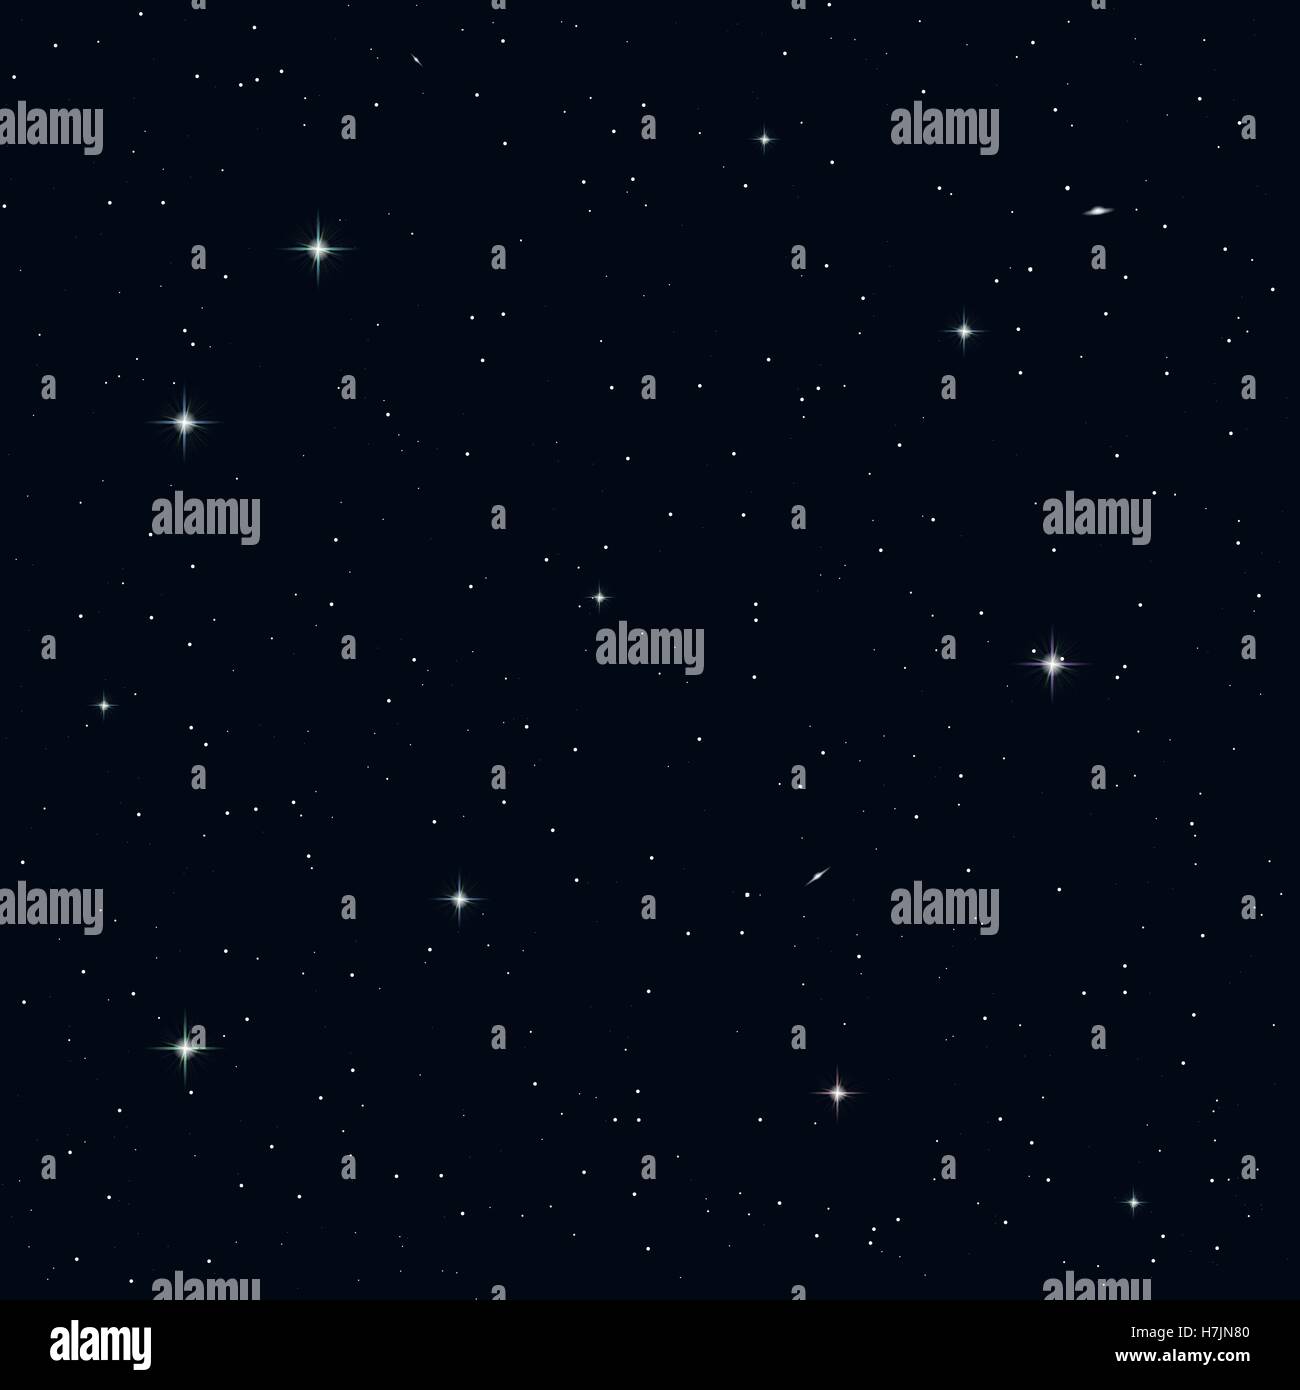 Realistic seamless vector image of the night sky with stars and galaxies. Stock Vector